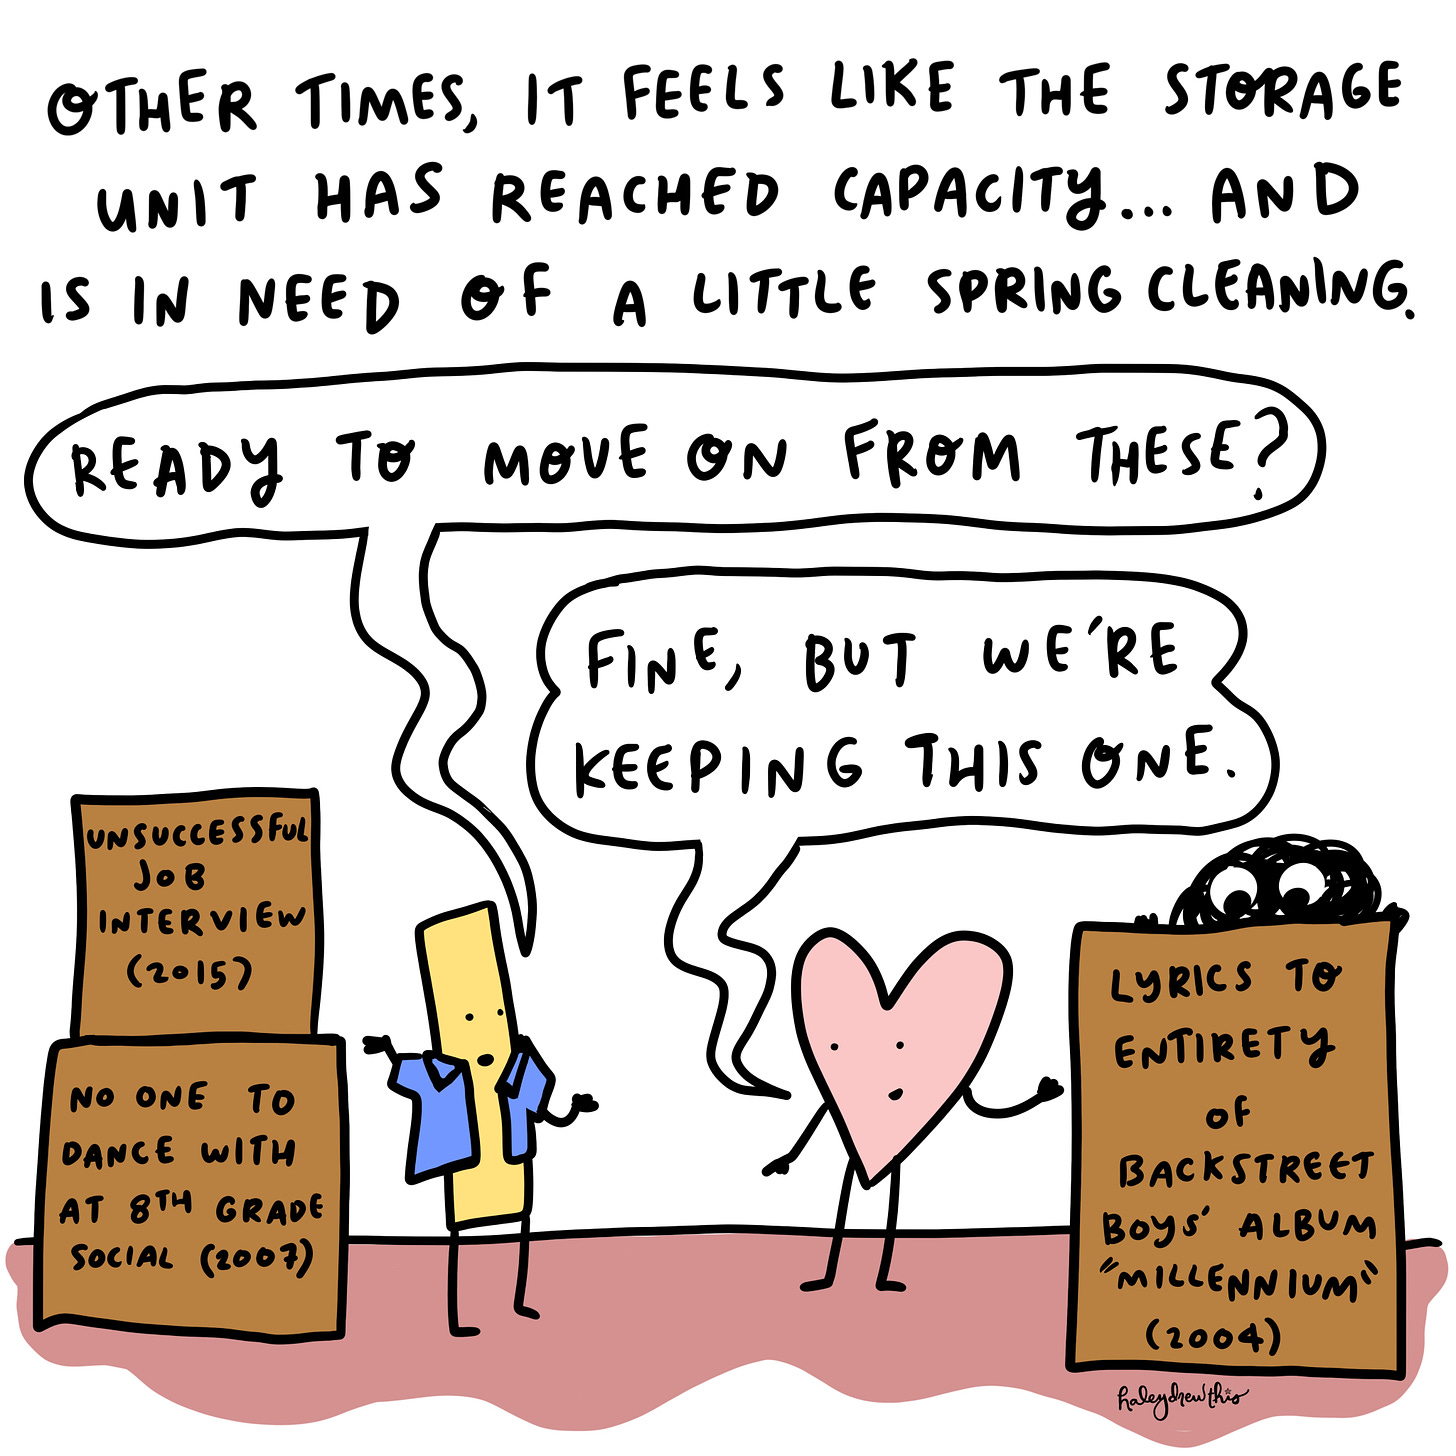 Other times, it feels like the storage unit has reached full capacity… And is in need of a little spring cleaning. Illustration: The Compartmentalizer: I think we can get rid of these, yeah? (Box that reads “Unsuccessful job interview, 2016” and “non one to grind with at sixth grade dance”). Me: Fine, but we’re keeping these (Box with lyrics to entirety of Backstreet Boys Millenium)